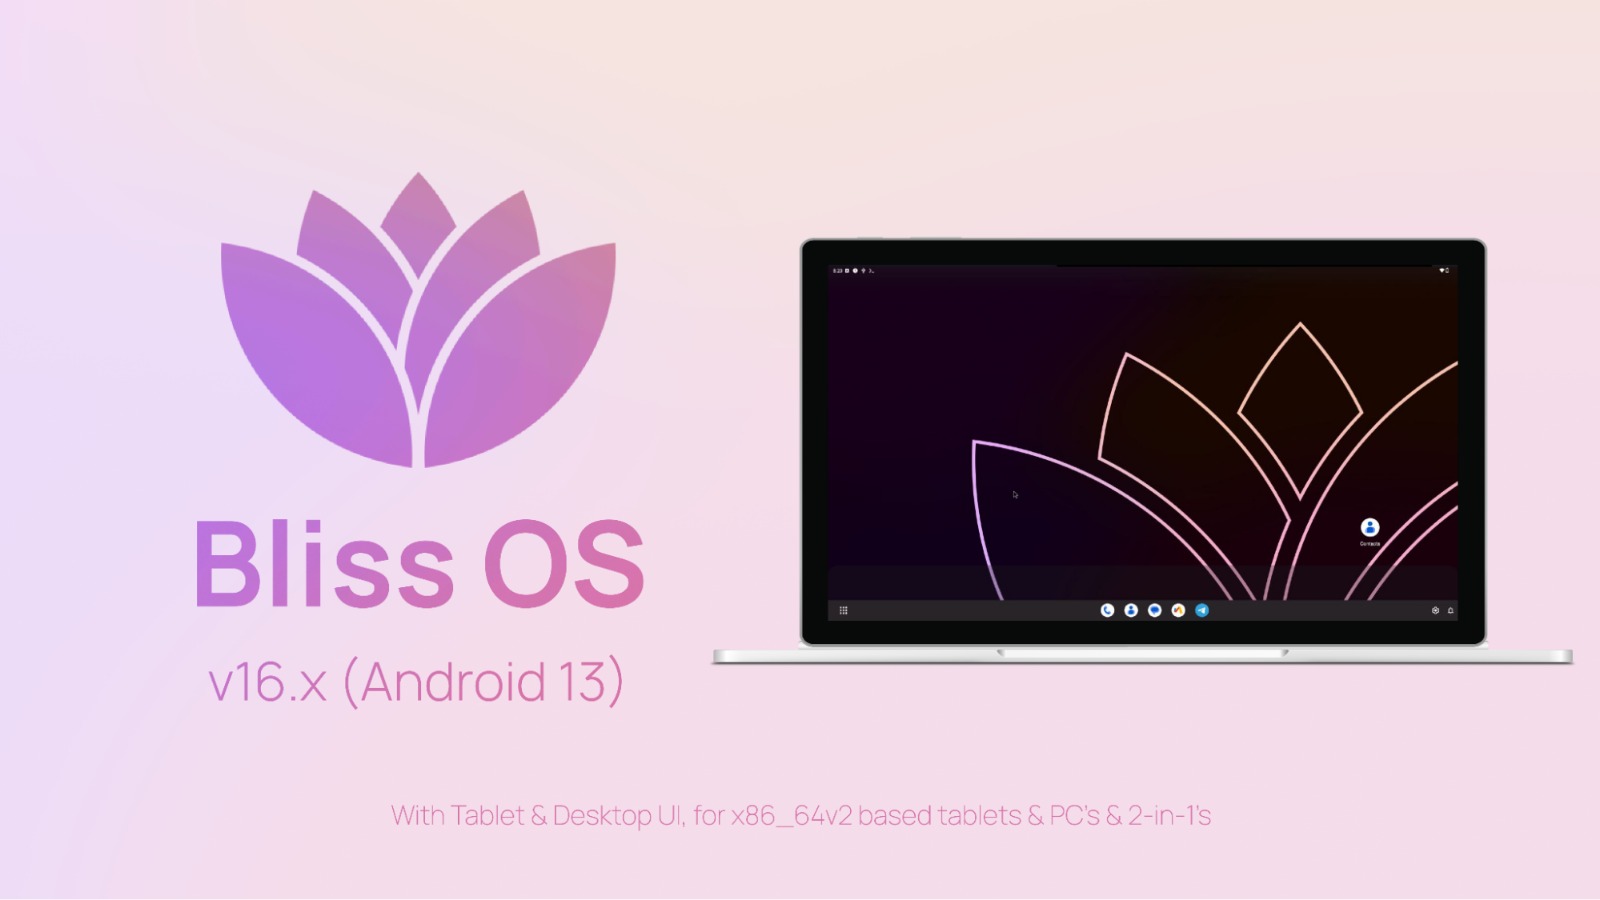 Operating system Bliss OS